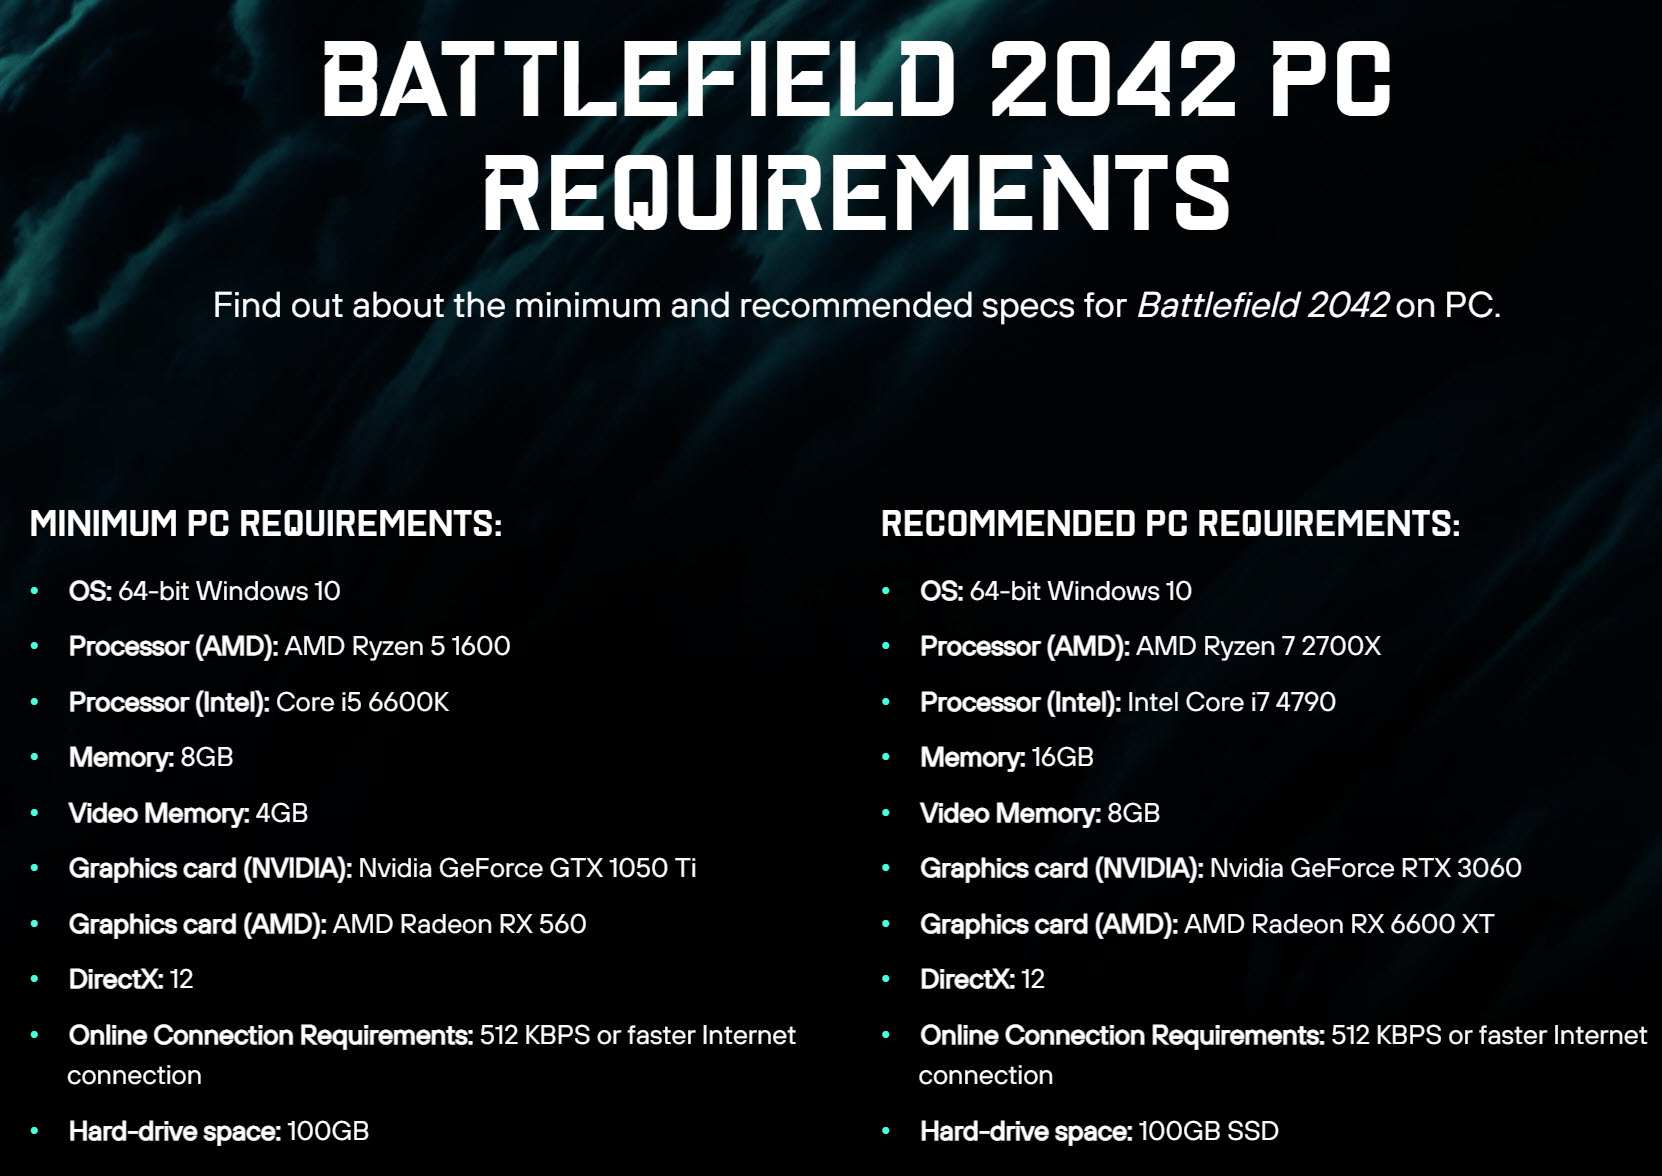 System Requirements for Battlefield 2042